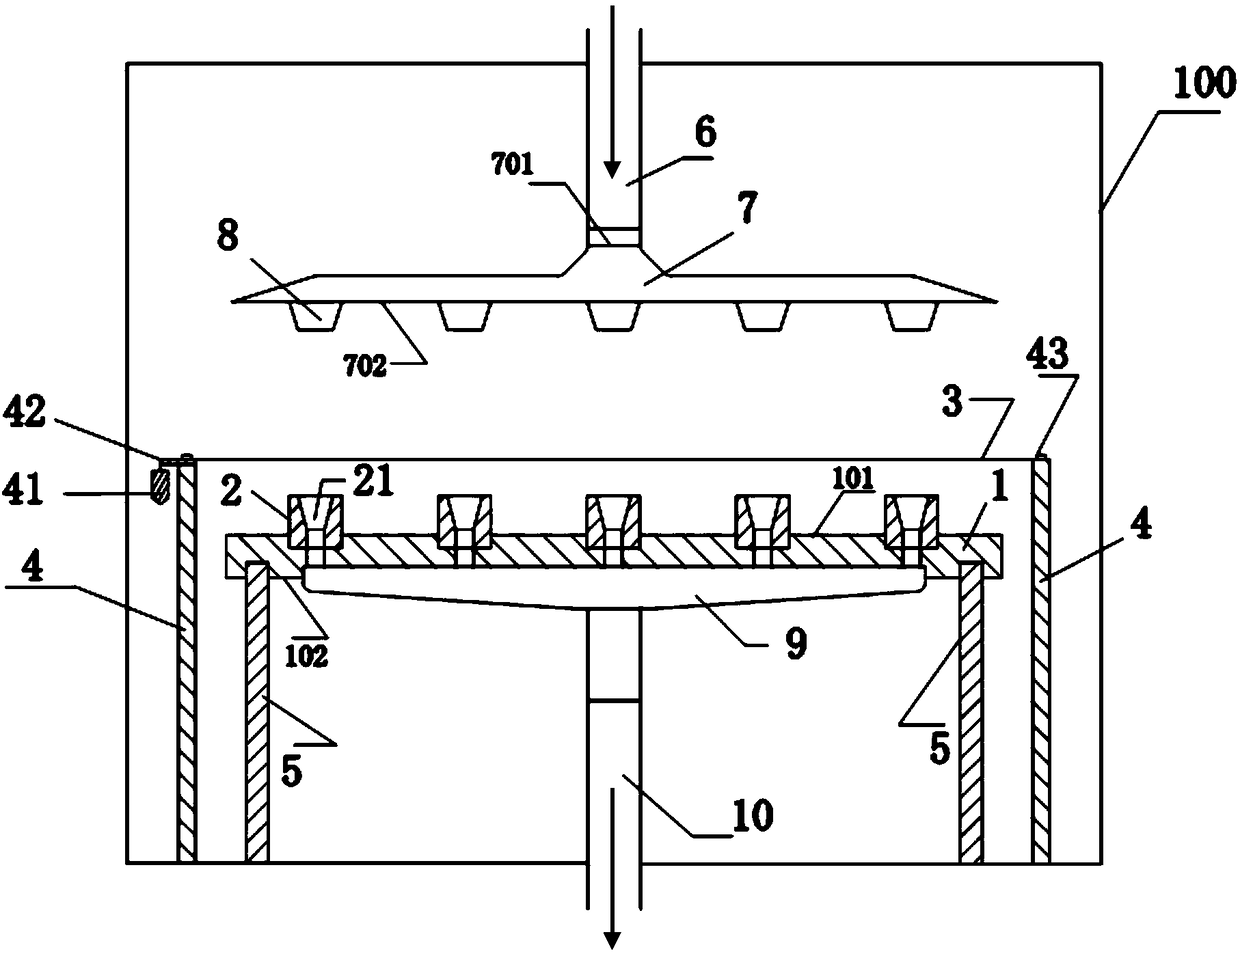 Apparatus for preparing diamond coating in inner bores of wire-drawing dies